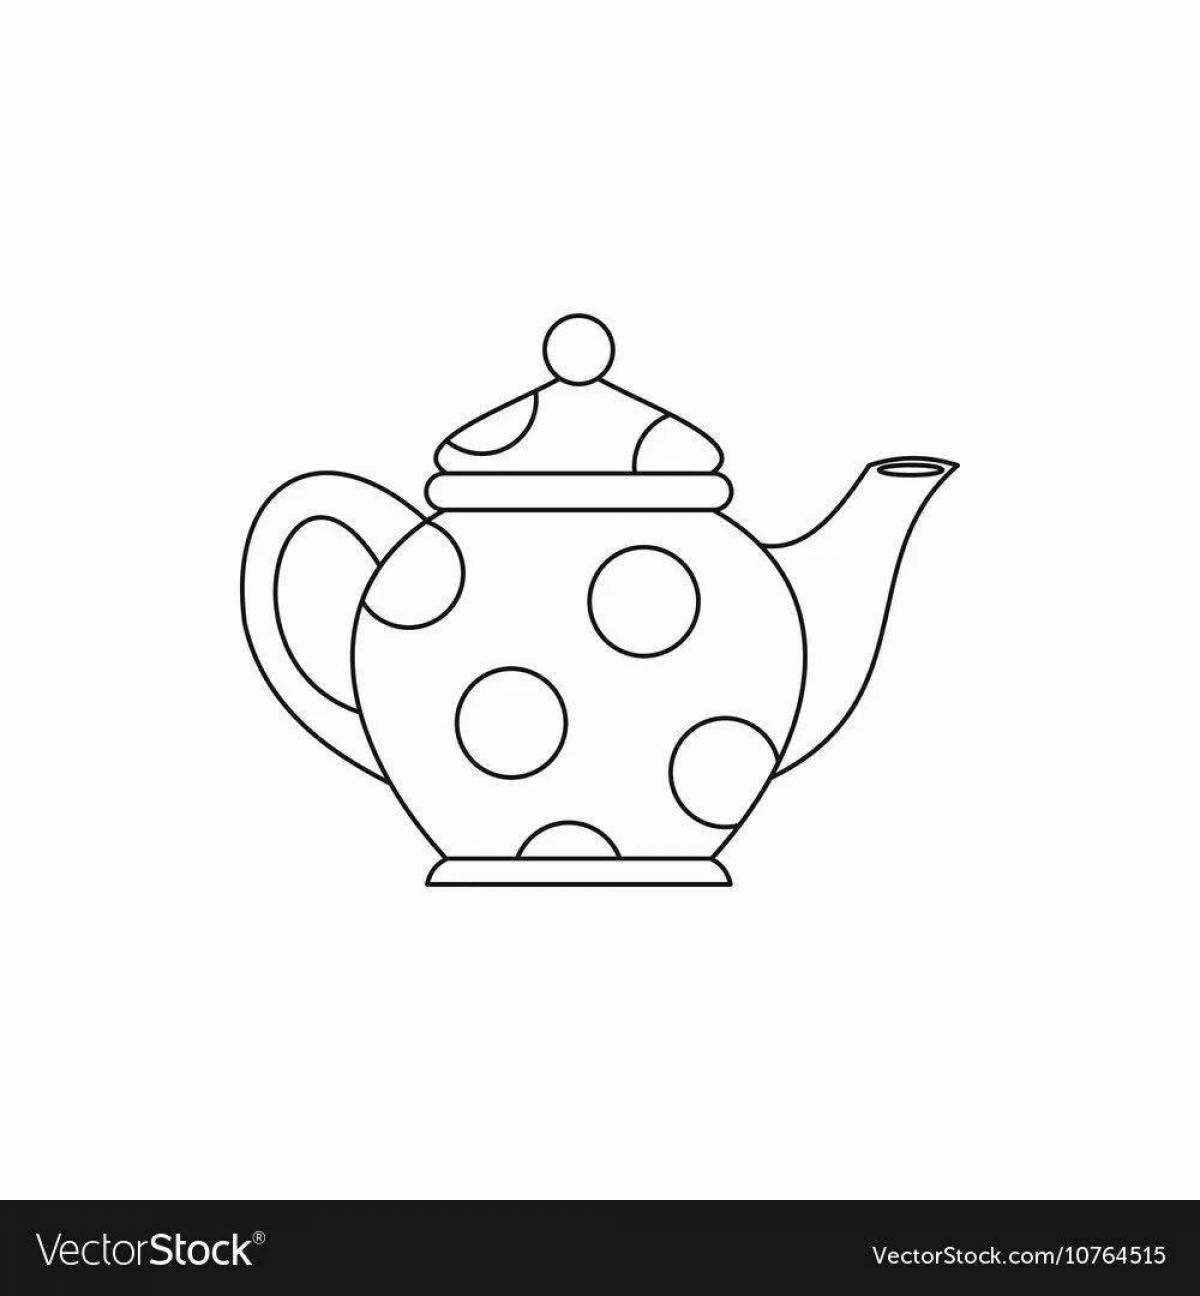 Amazing teapot coloring book for kids